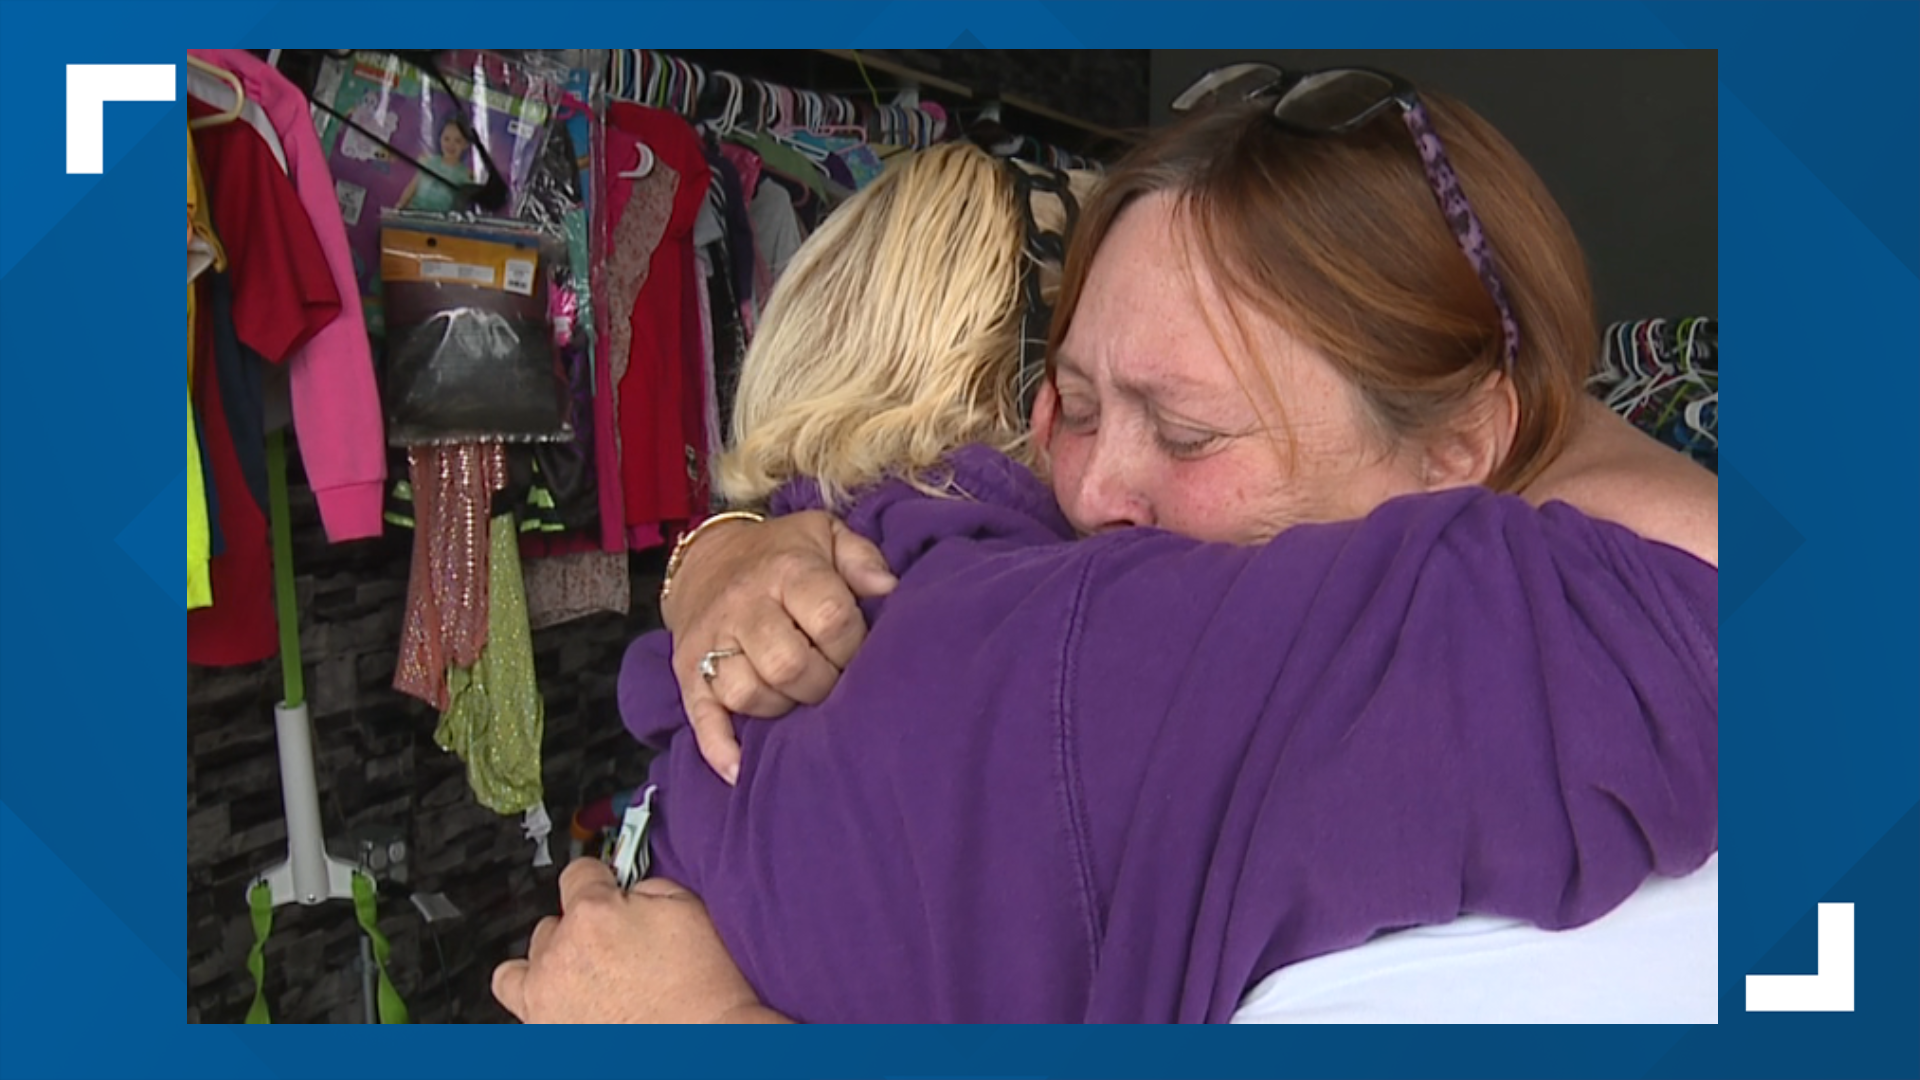 The store owner says around 50 people visit a day and many of them are homeless.